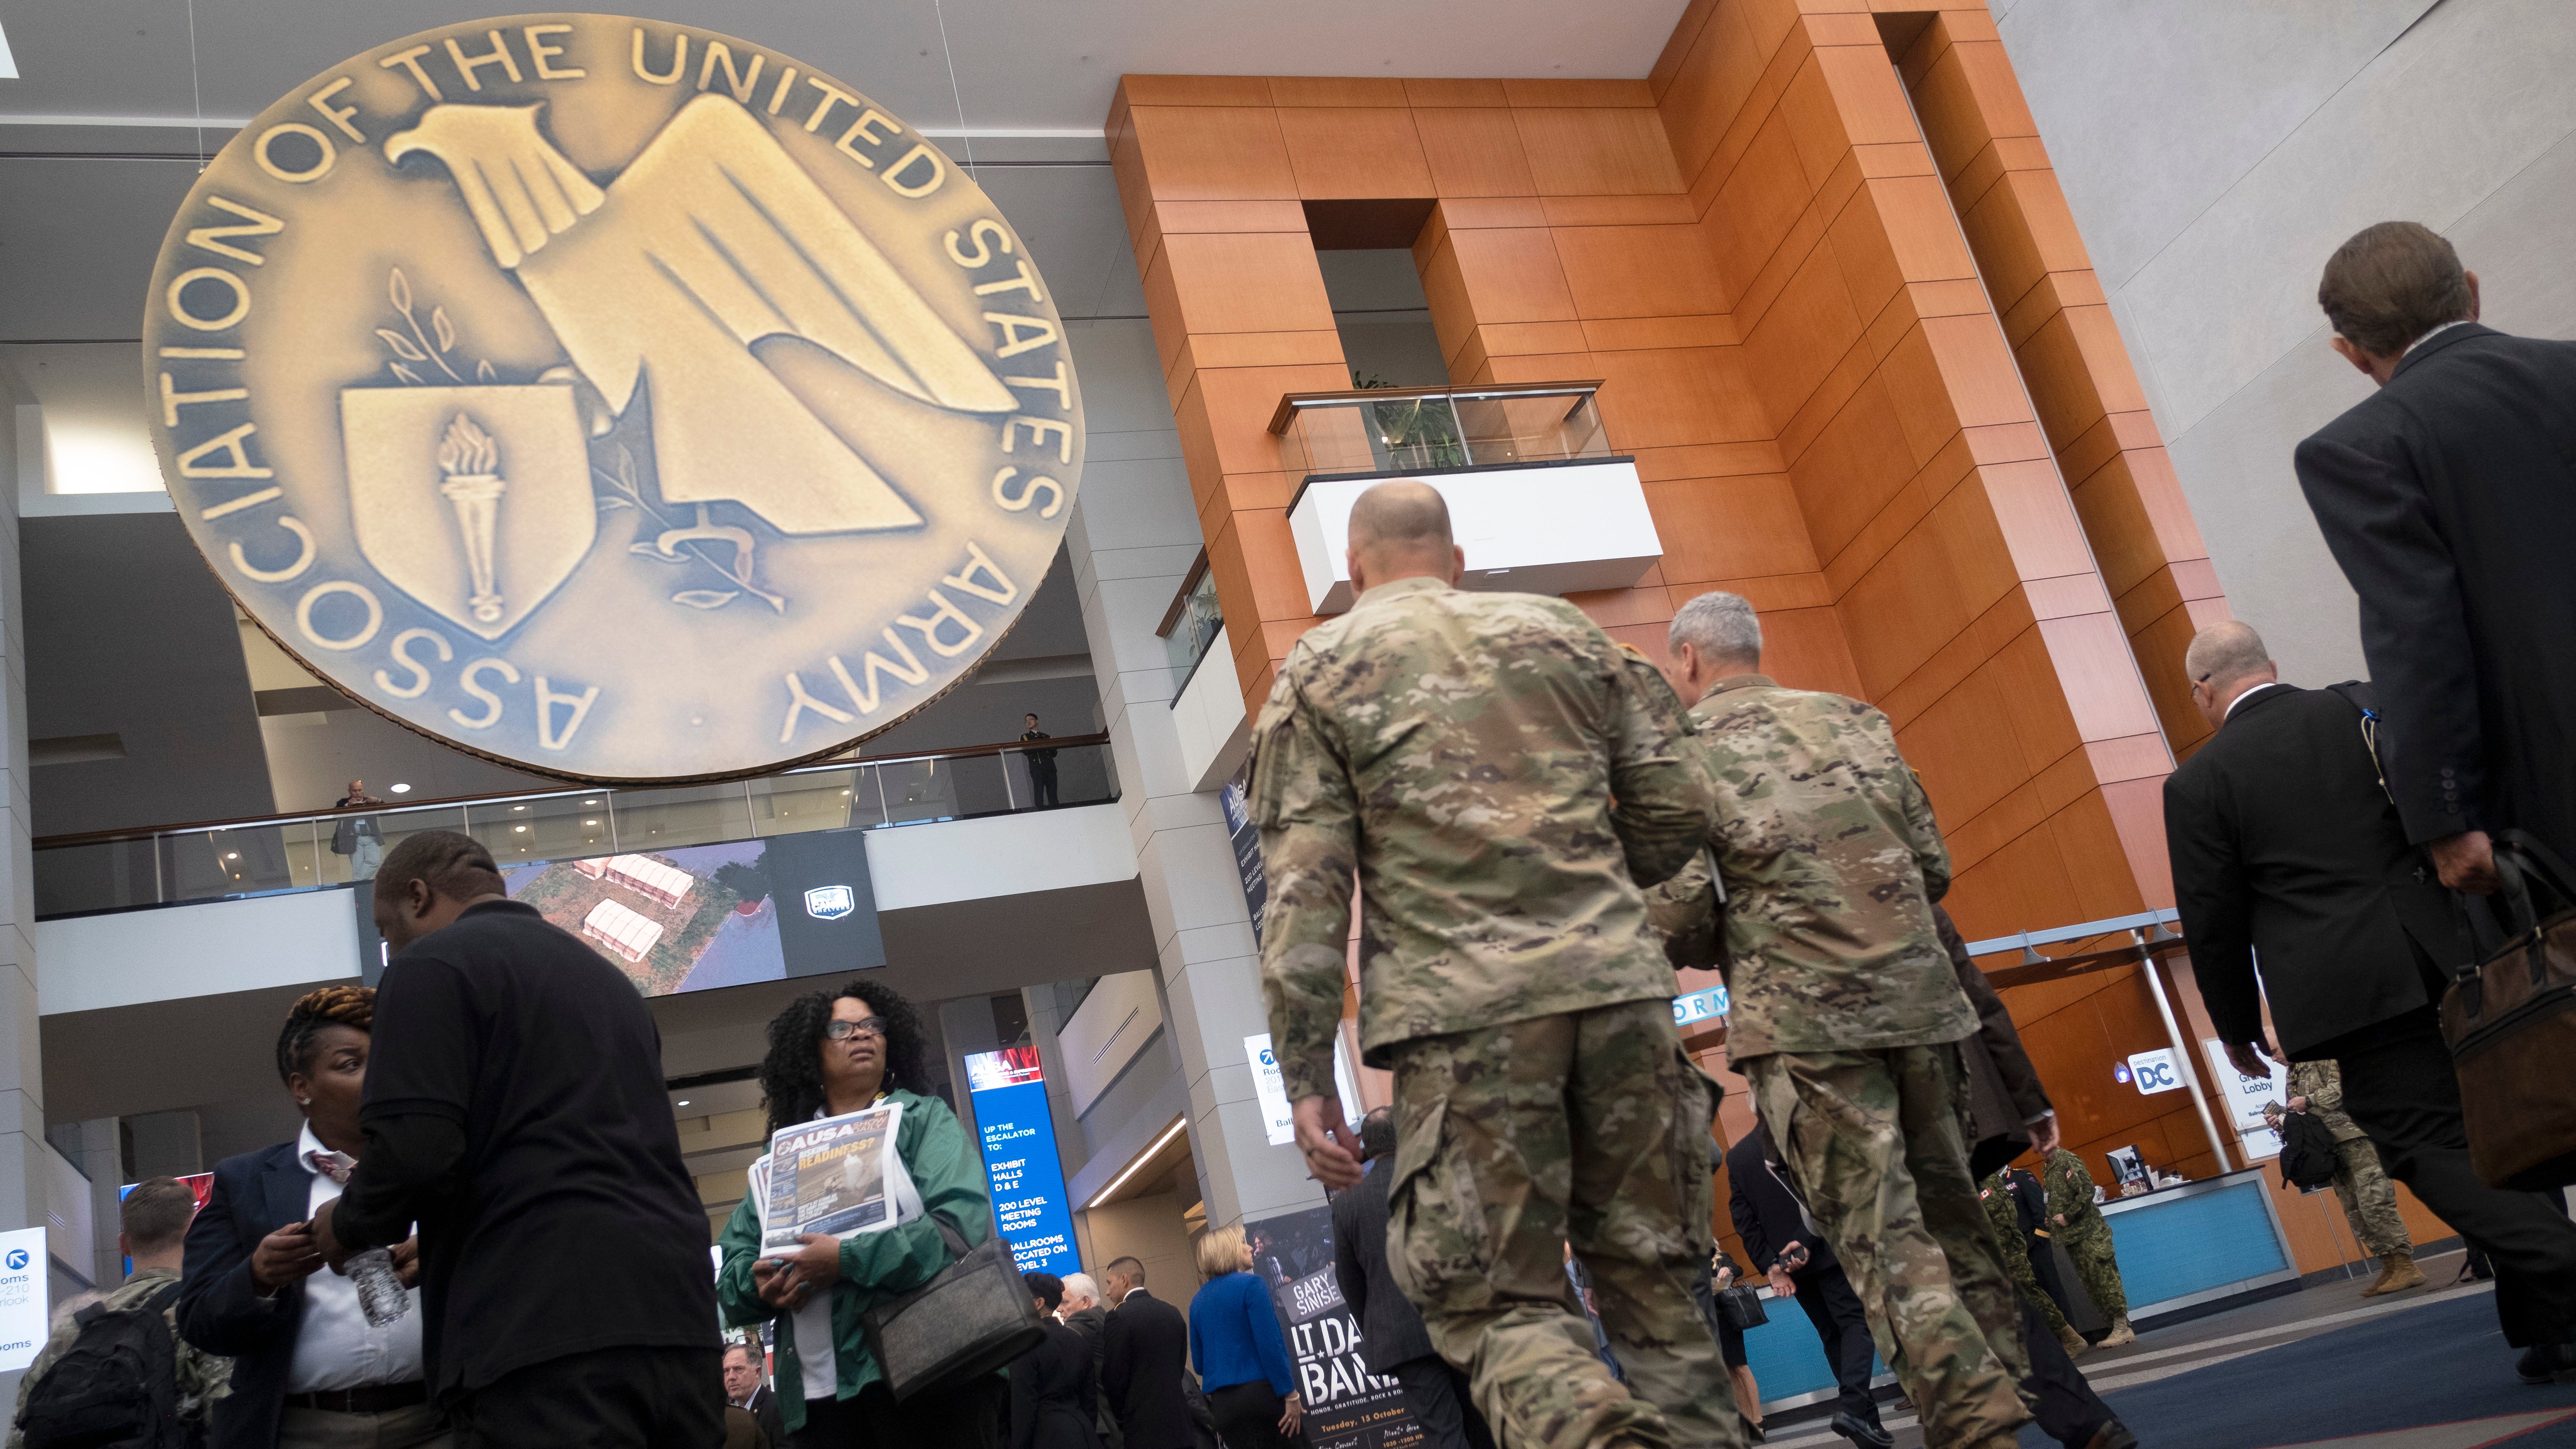 Attendees at the AUSA 2019 Annual Meeting.